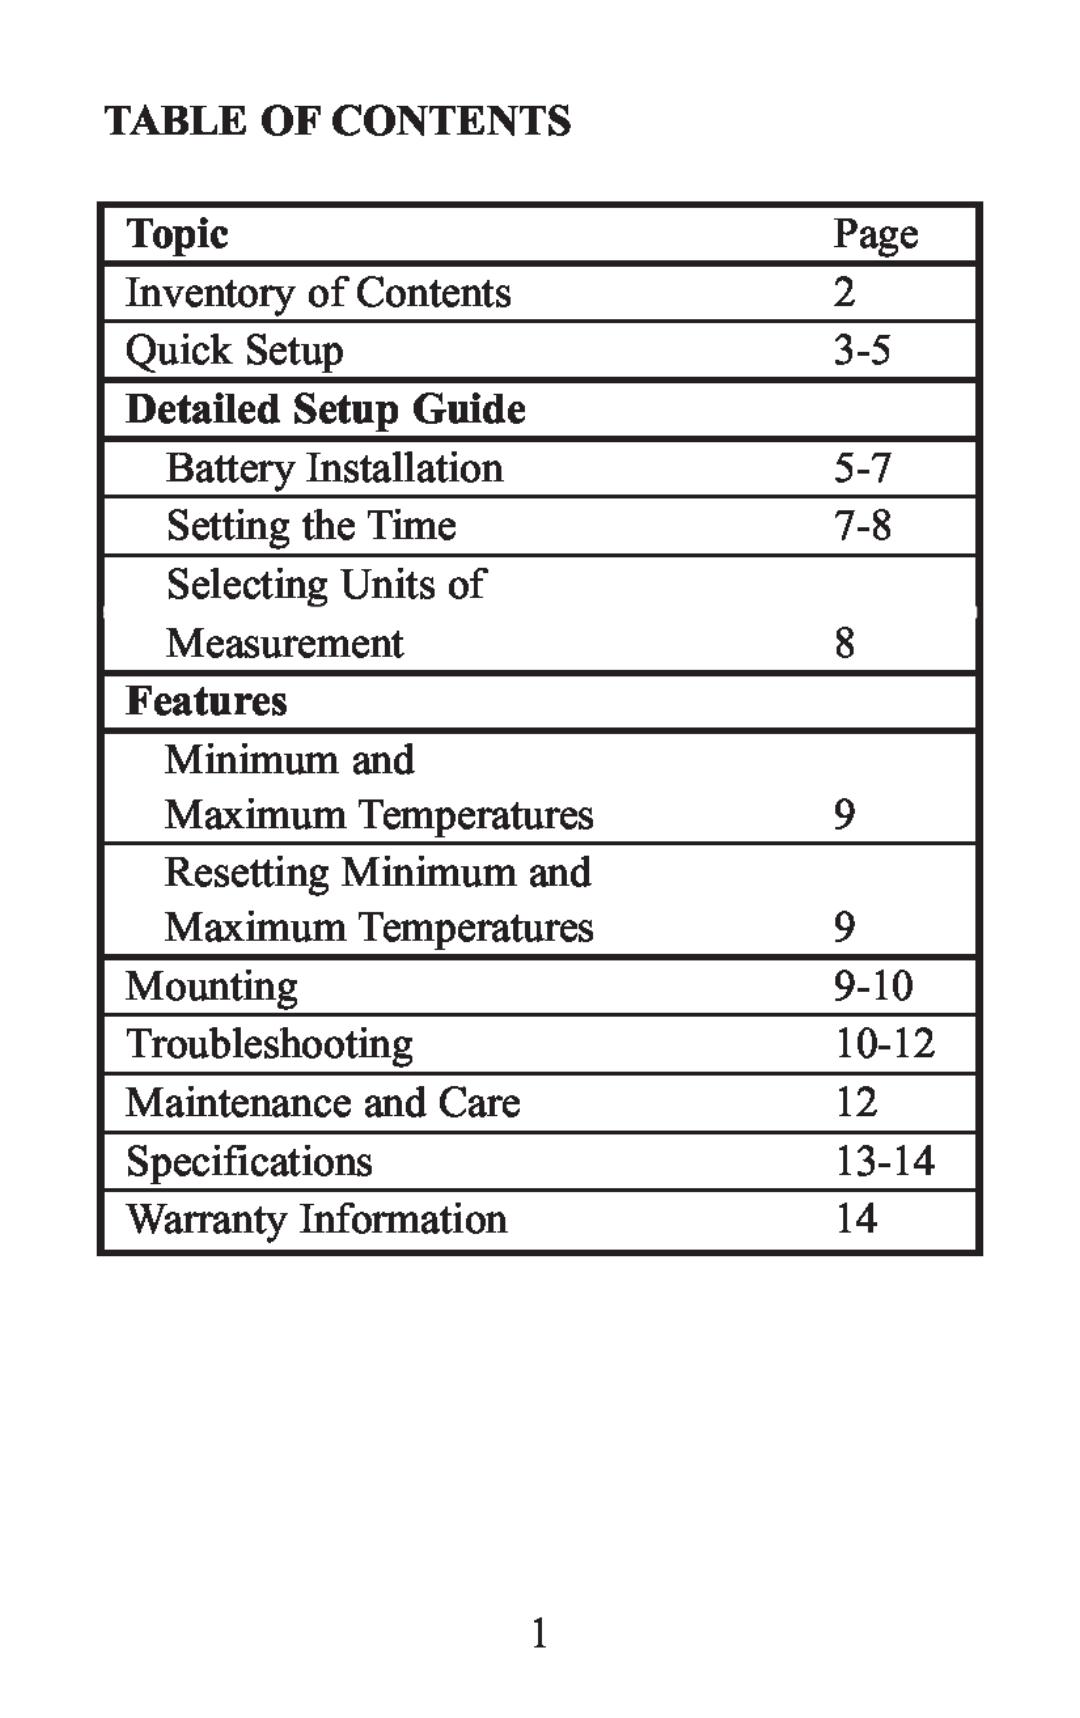 Oreck WS-7013U instruction manual Table Of Contents, Topic, Detailed Setup Guide, Features 